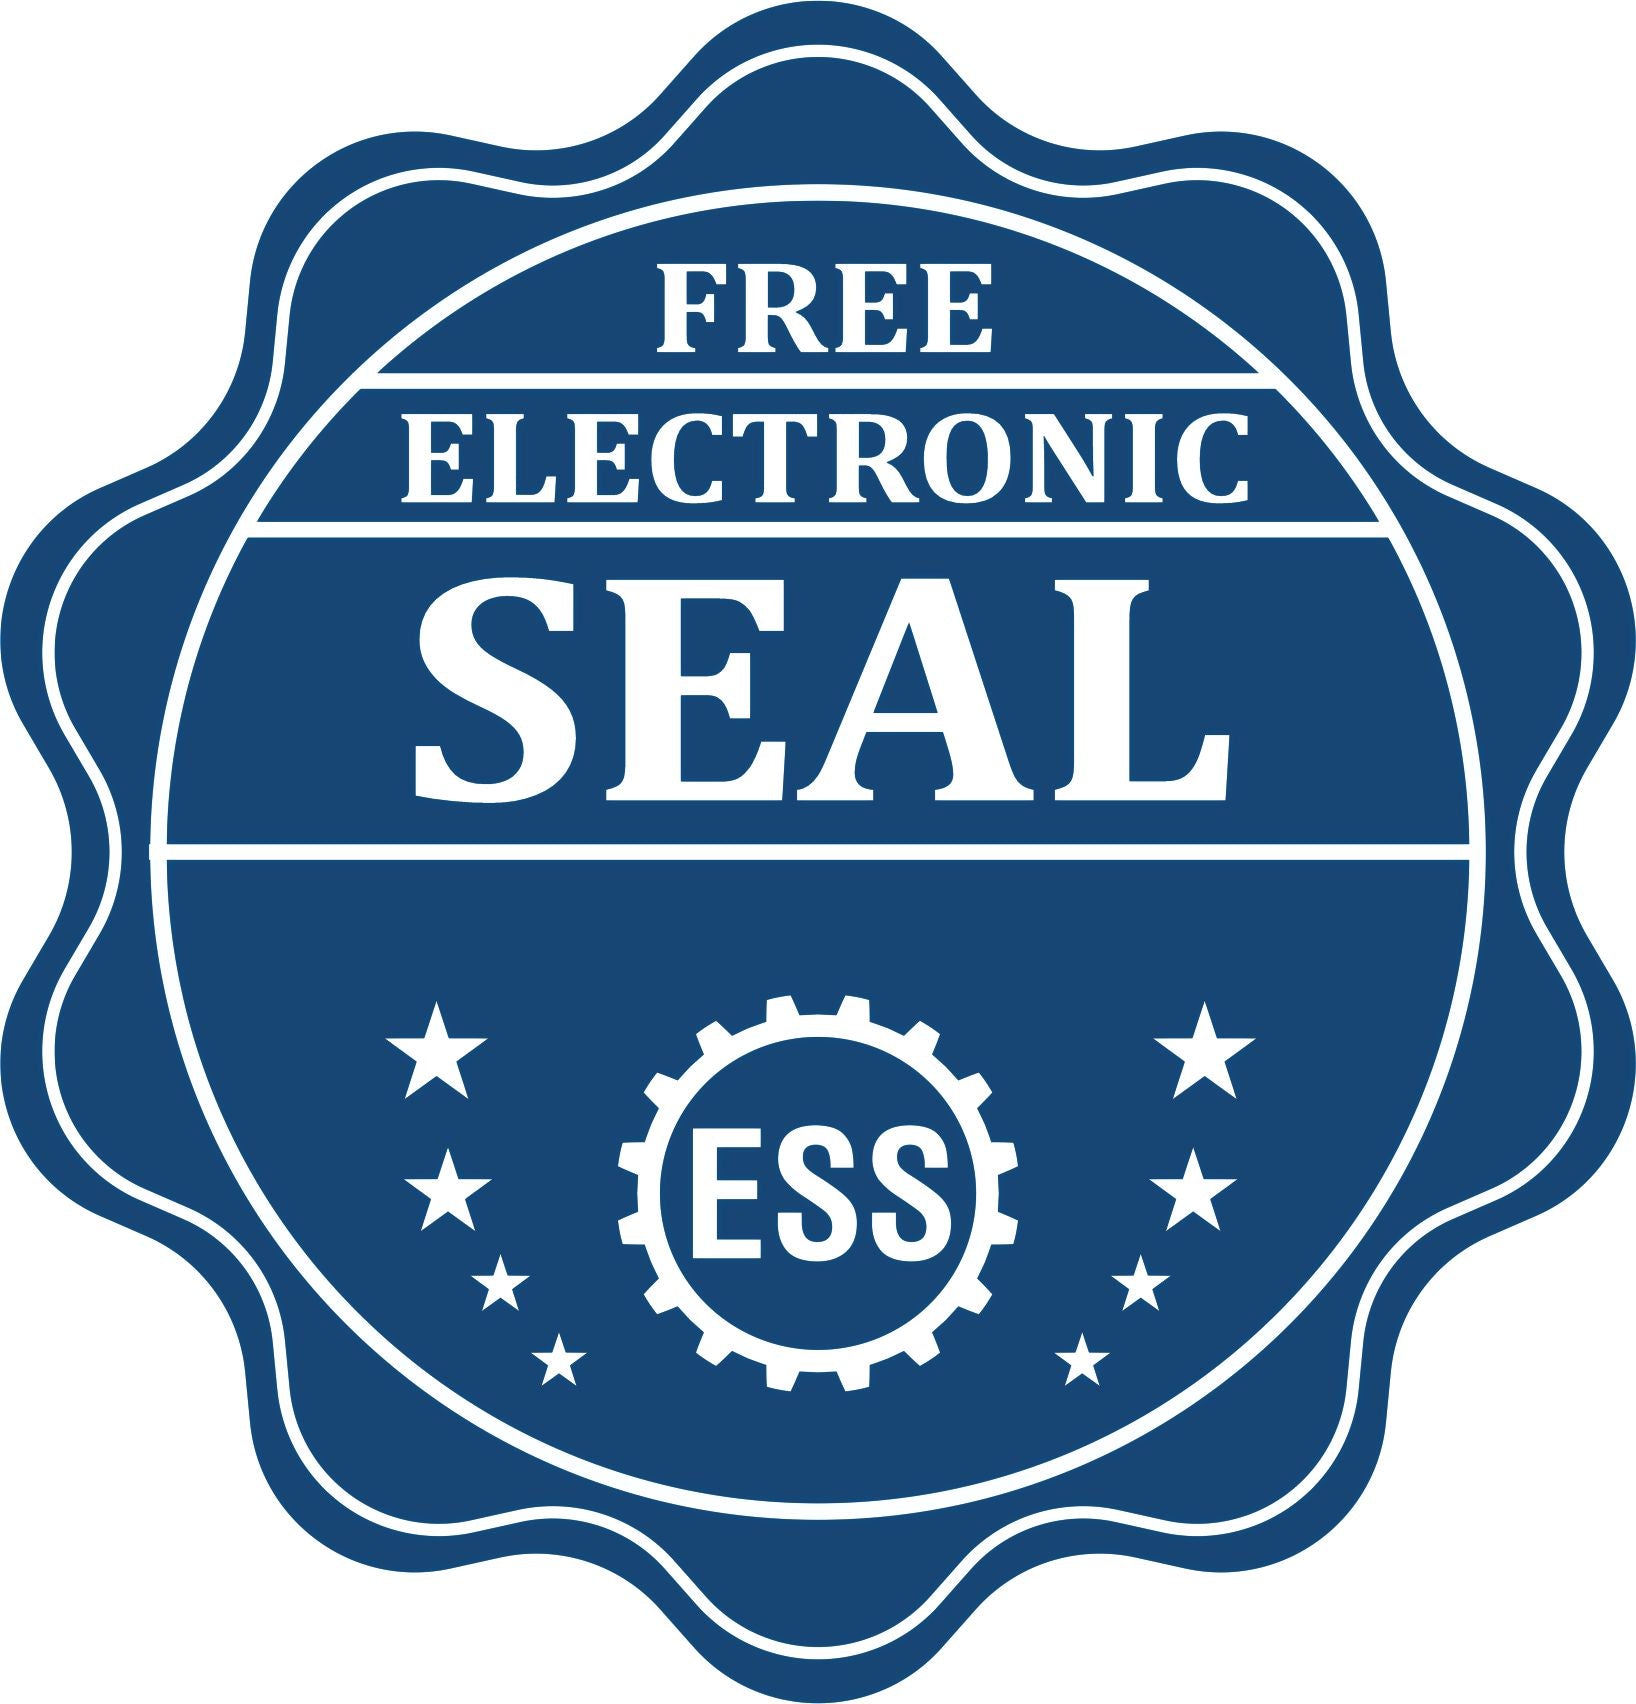 A badge showing a free electronic seal for the Hybrid Montana Land Surveyor Seal with stars and the ESS gear on the emblem.